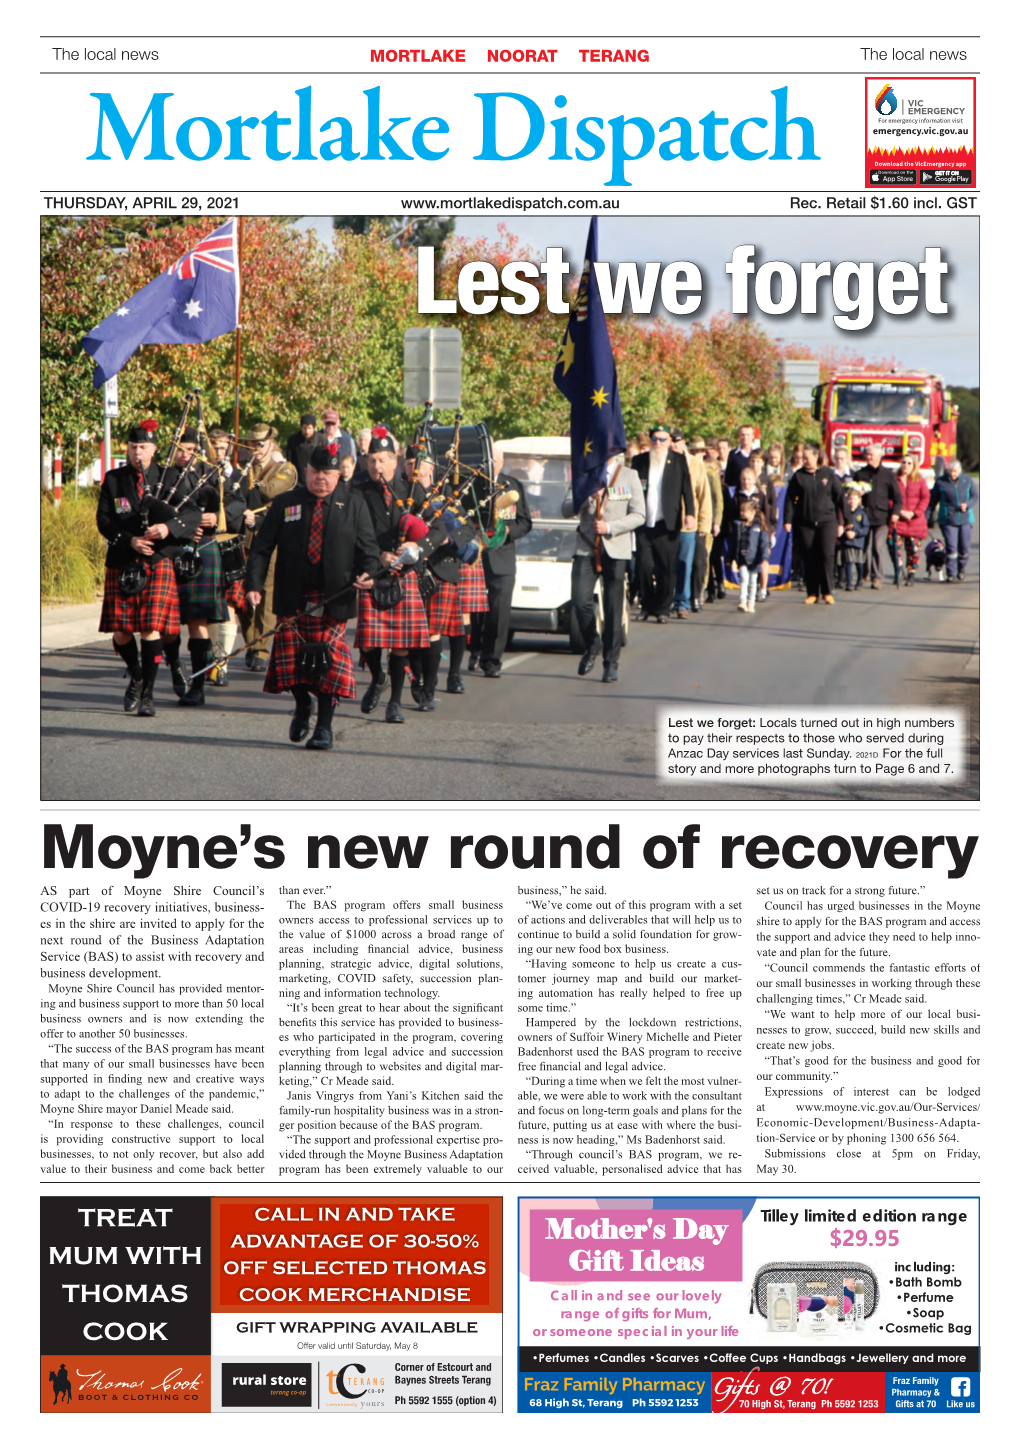 Moyne's New Round of Recovery